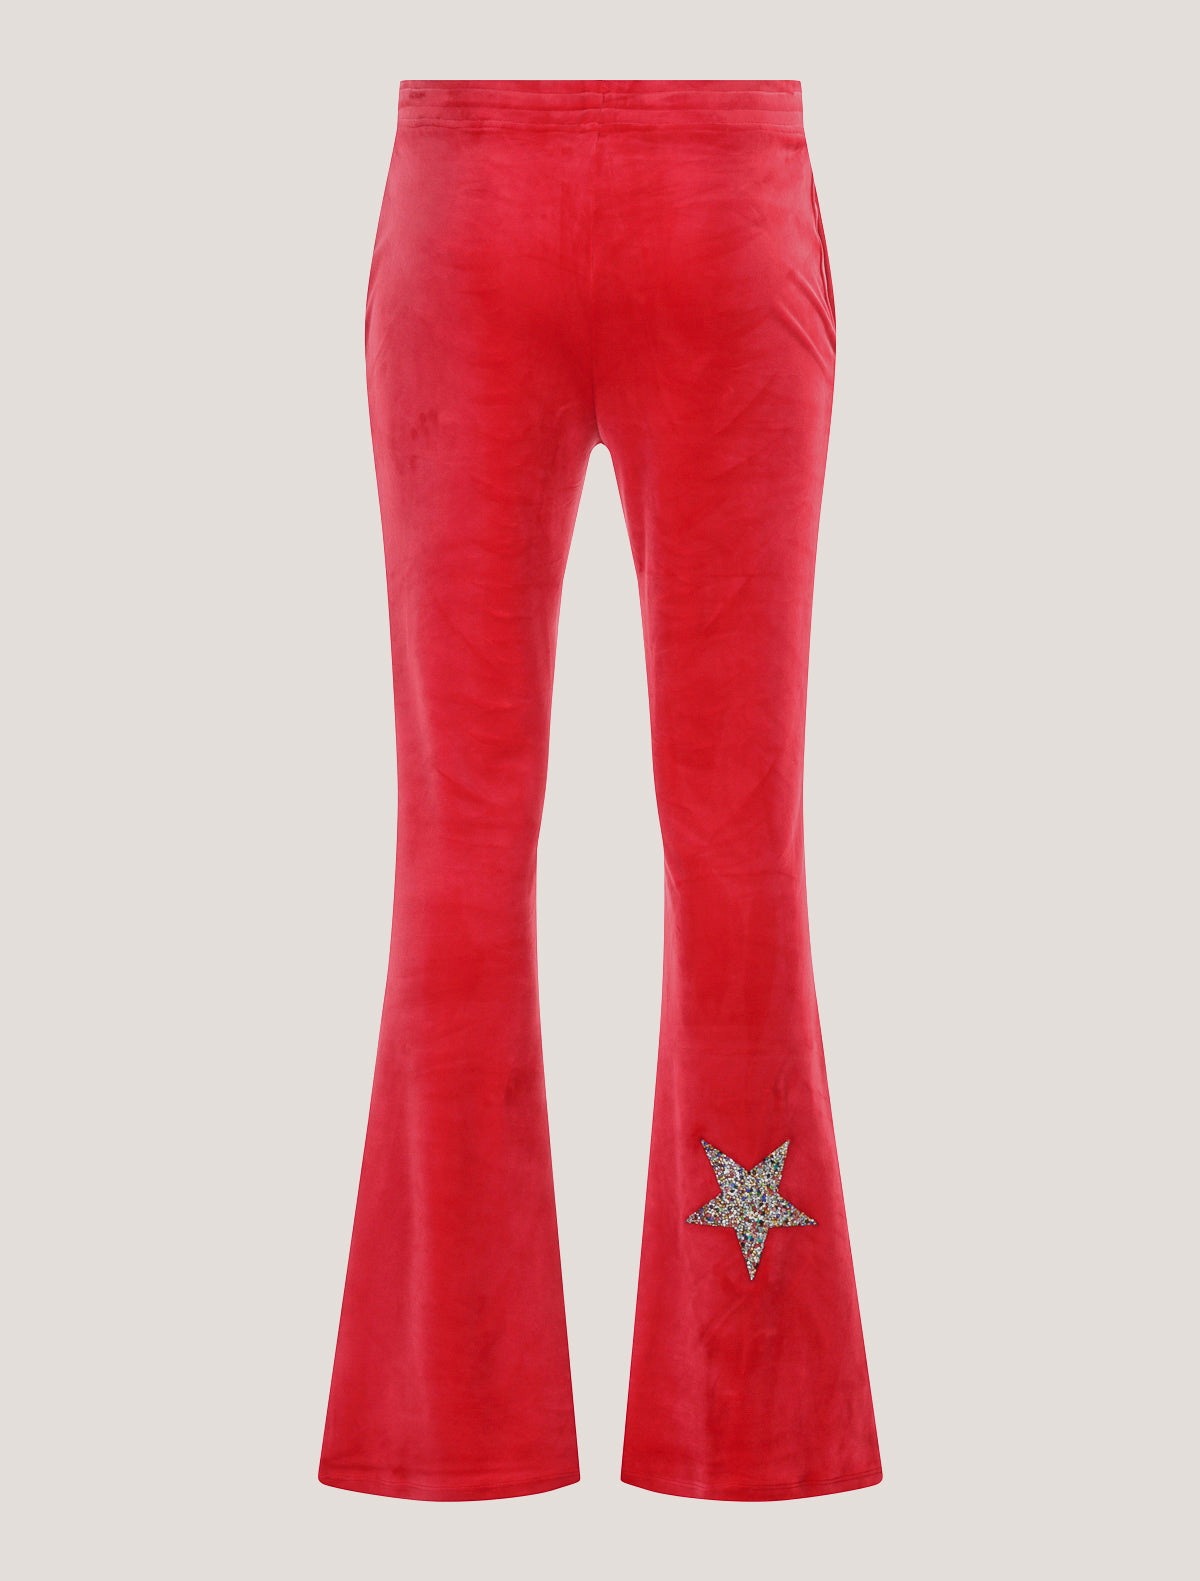 Hollywood Star Pant by Paris Hilton Tracksuits